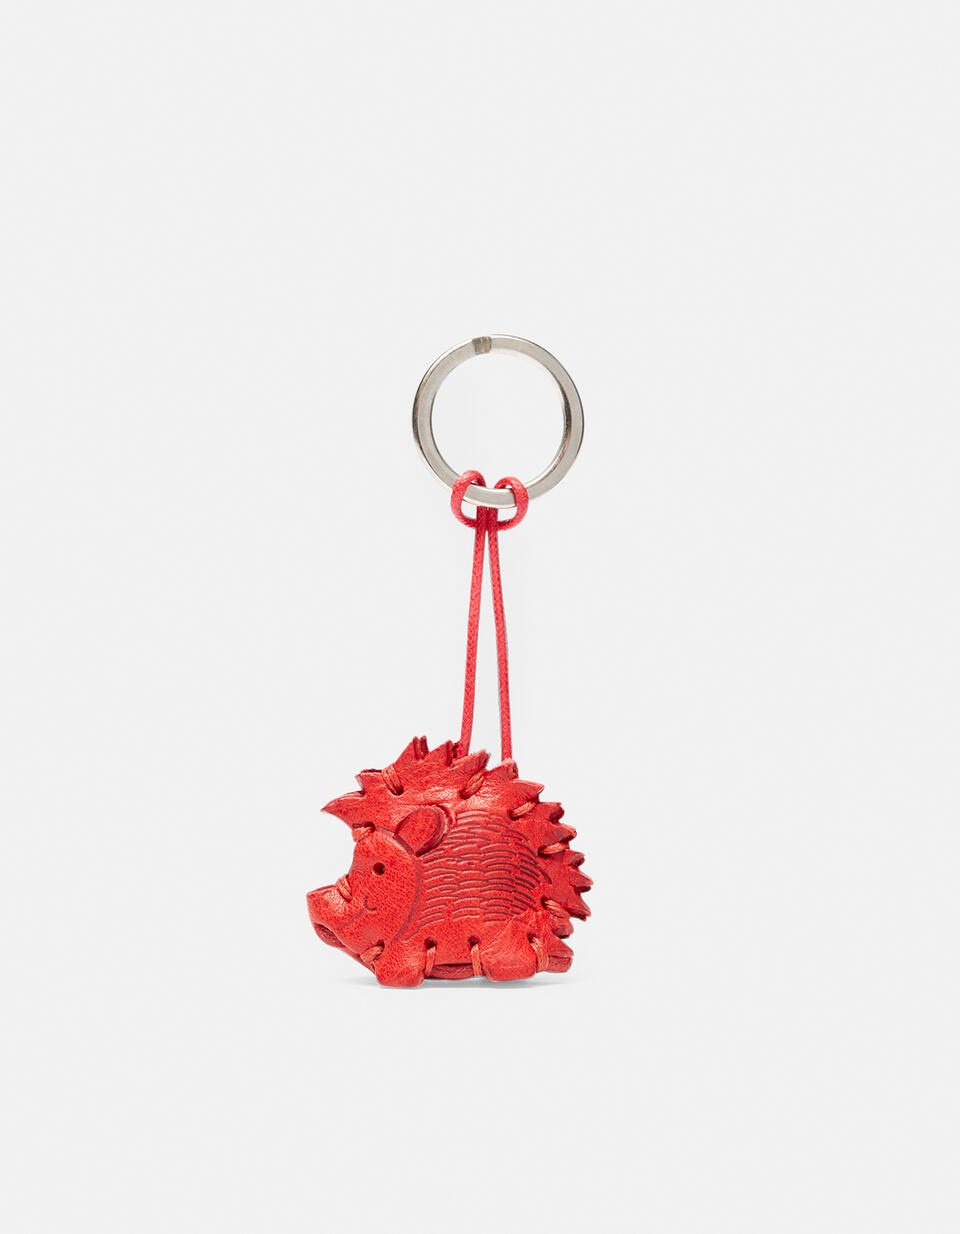 Curly leather keyring - Key holders - Women's Accessories | Accessories ROSSO - Key holders - Women's Accessories | AccessoriesCuoieria Fiorentina